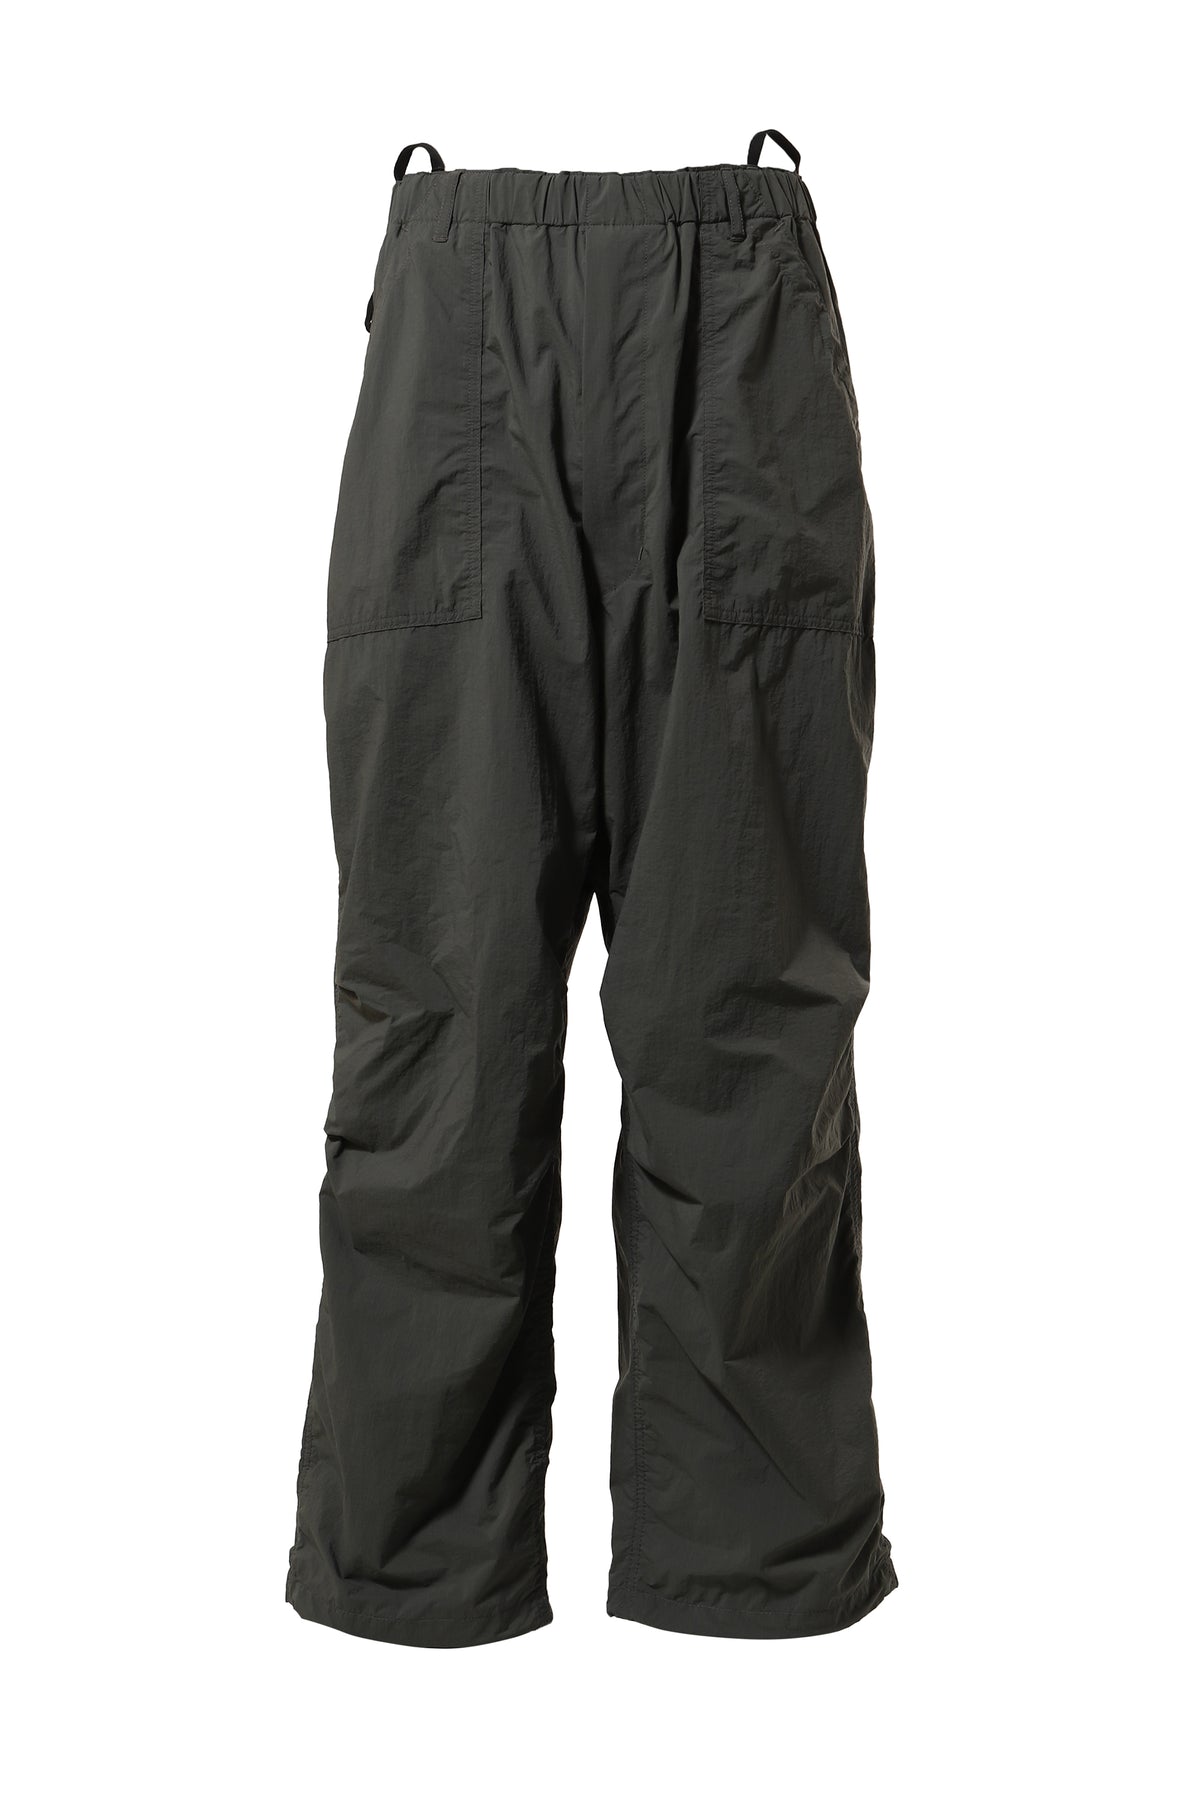 TACTICAL PANTS / GRY